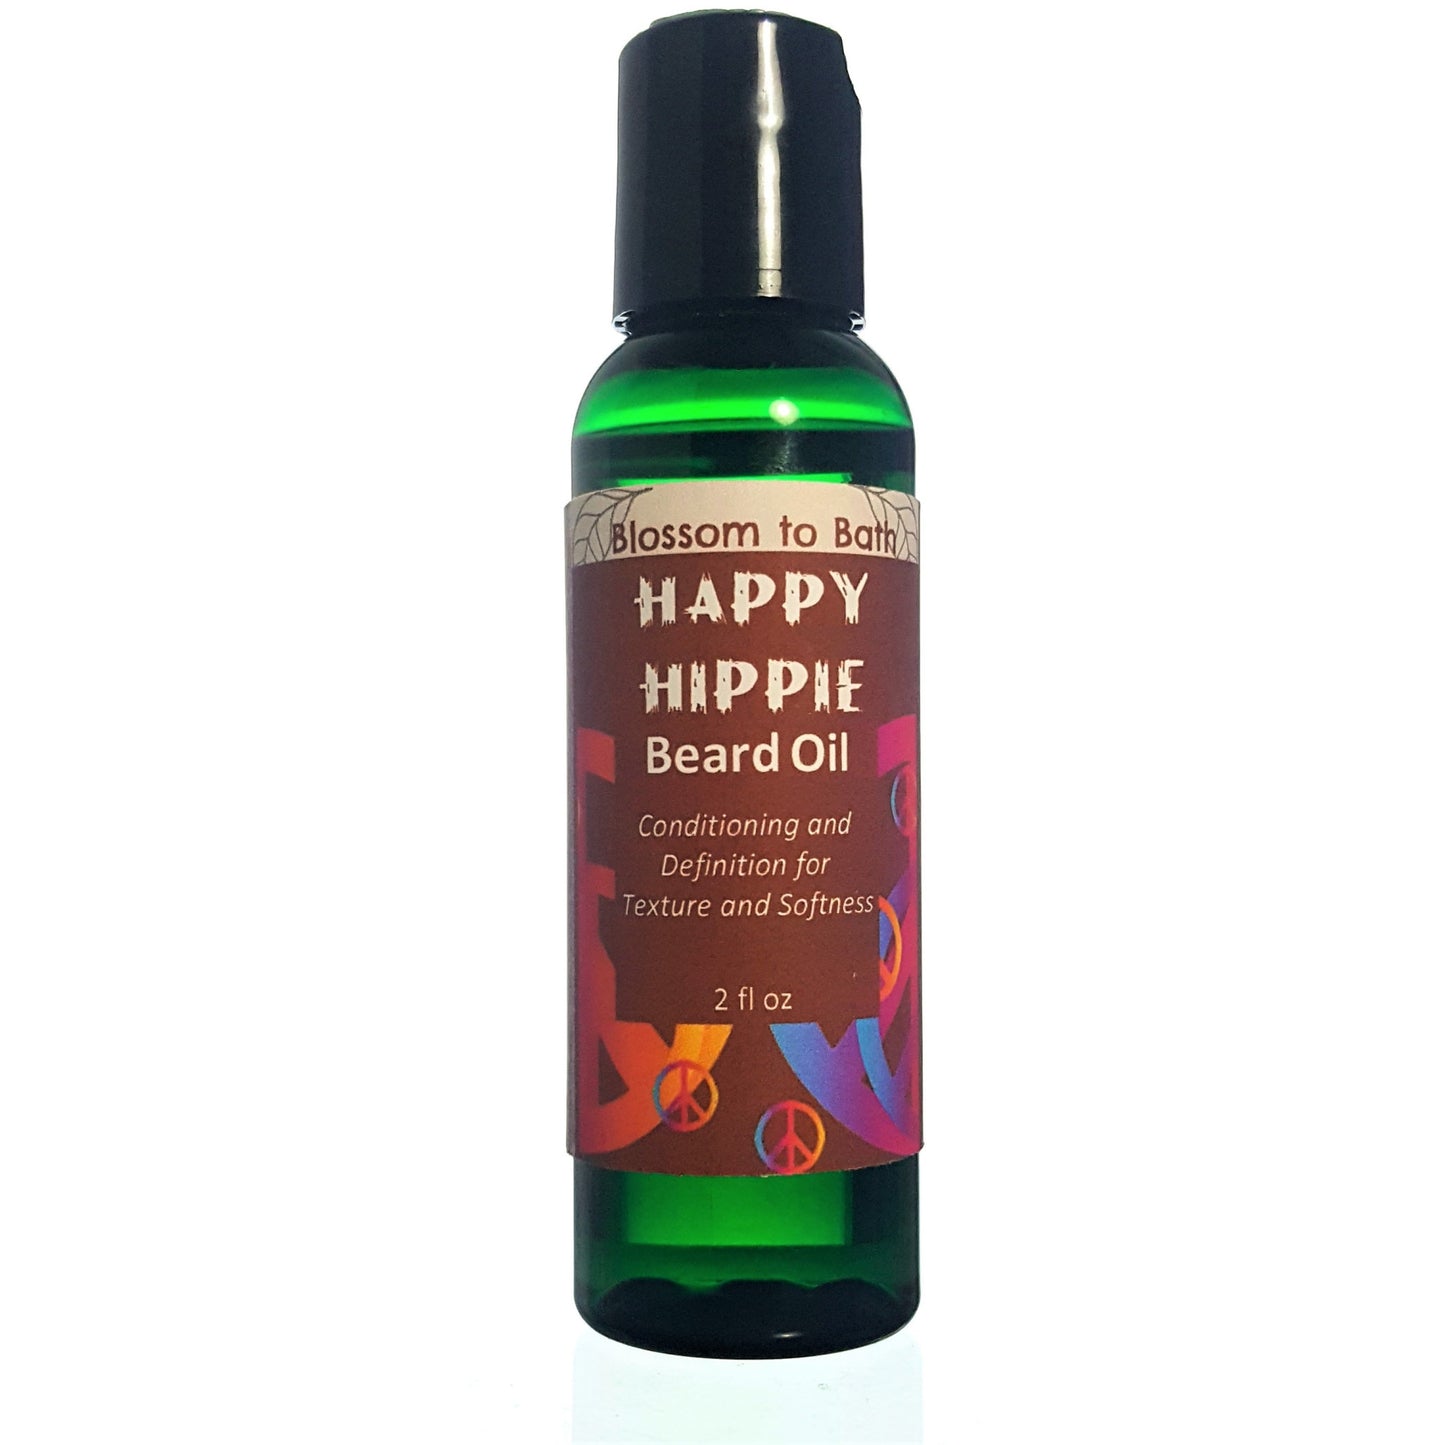 Buy Blossom to Bath Happy Hippie Beard Oil from Flowersong Soap Studio.  Deepen beard tones and textures while softening with Organic oils to keep your beard at its groomed, conditioned best  A refreshing herbal fragrance that elevates your mood and your perspective.